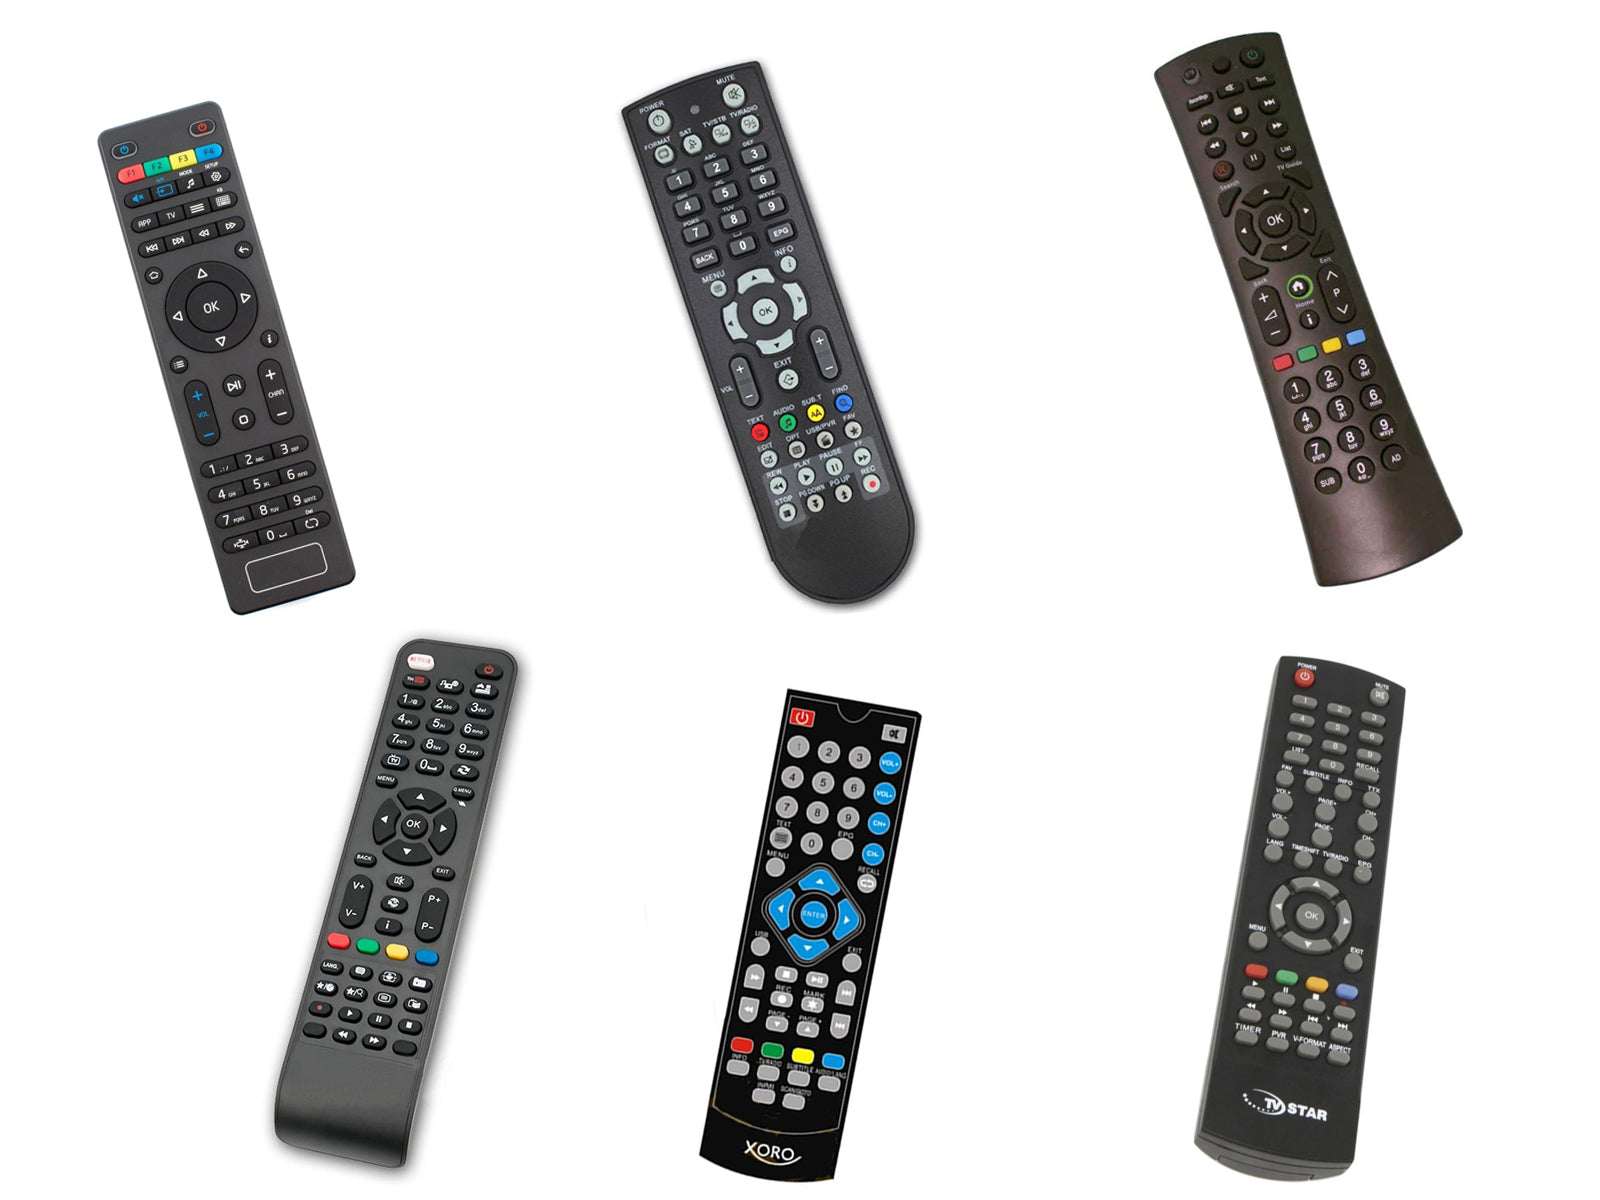 Humax Remote Control, Remote Control for IPTV Box With Variety of MAG Box's, Universal Ferguson Ariva Remote Control, Replacement Walker TV Remote Control, TV Star 1020 Replacement Remote Control, Xoro DTV-M5 Replacement Remote Control